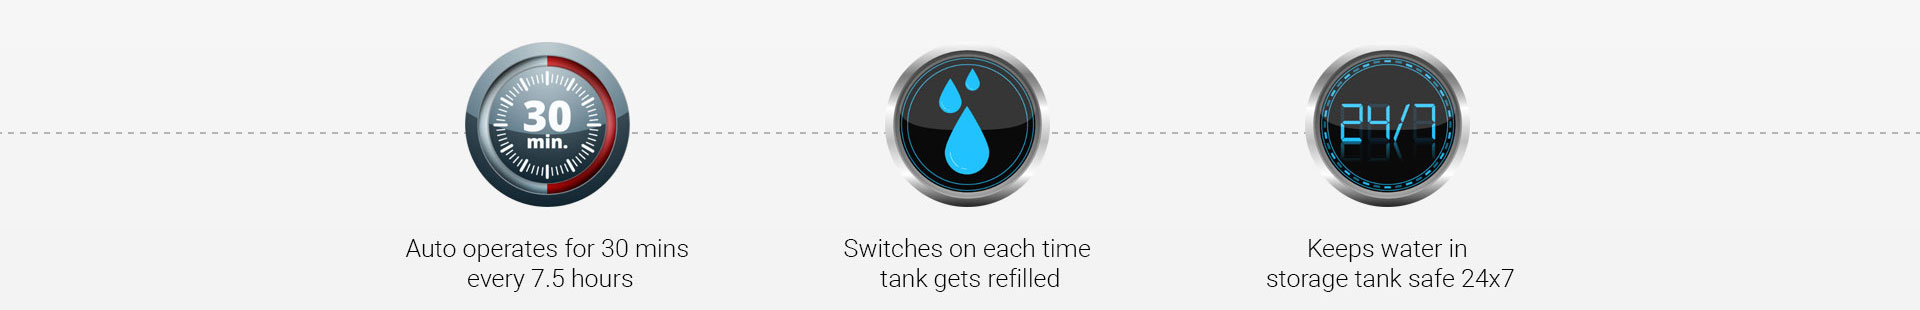 Auto operates for 30 mins every 7.5 hours, Switches on each time tank gets refilled, Keeps water in storage tank safe 24x7